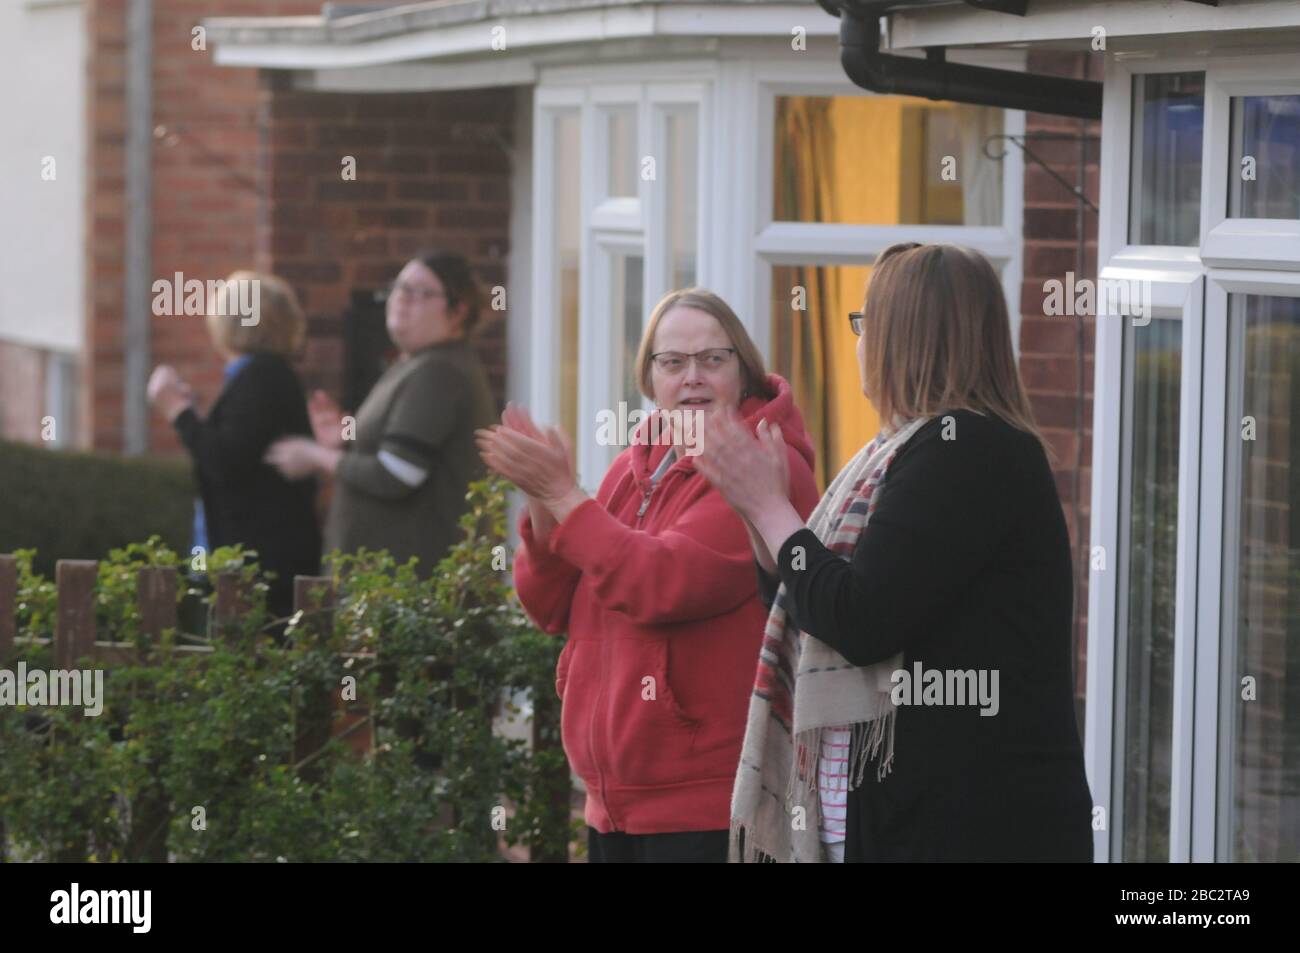 Kington, Herefordshire, UK. 2nd Apr, 2020. Residents in Llewellin Road in Kington take part in the Clap for Carers. The show of support was organised to thank key workers during the coronavirus pandemic. Credit: Andrew Compton/Alamy Live News Stock Photo